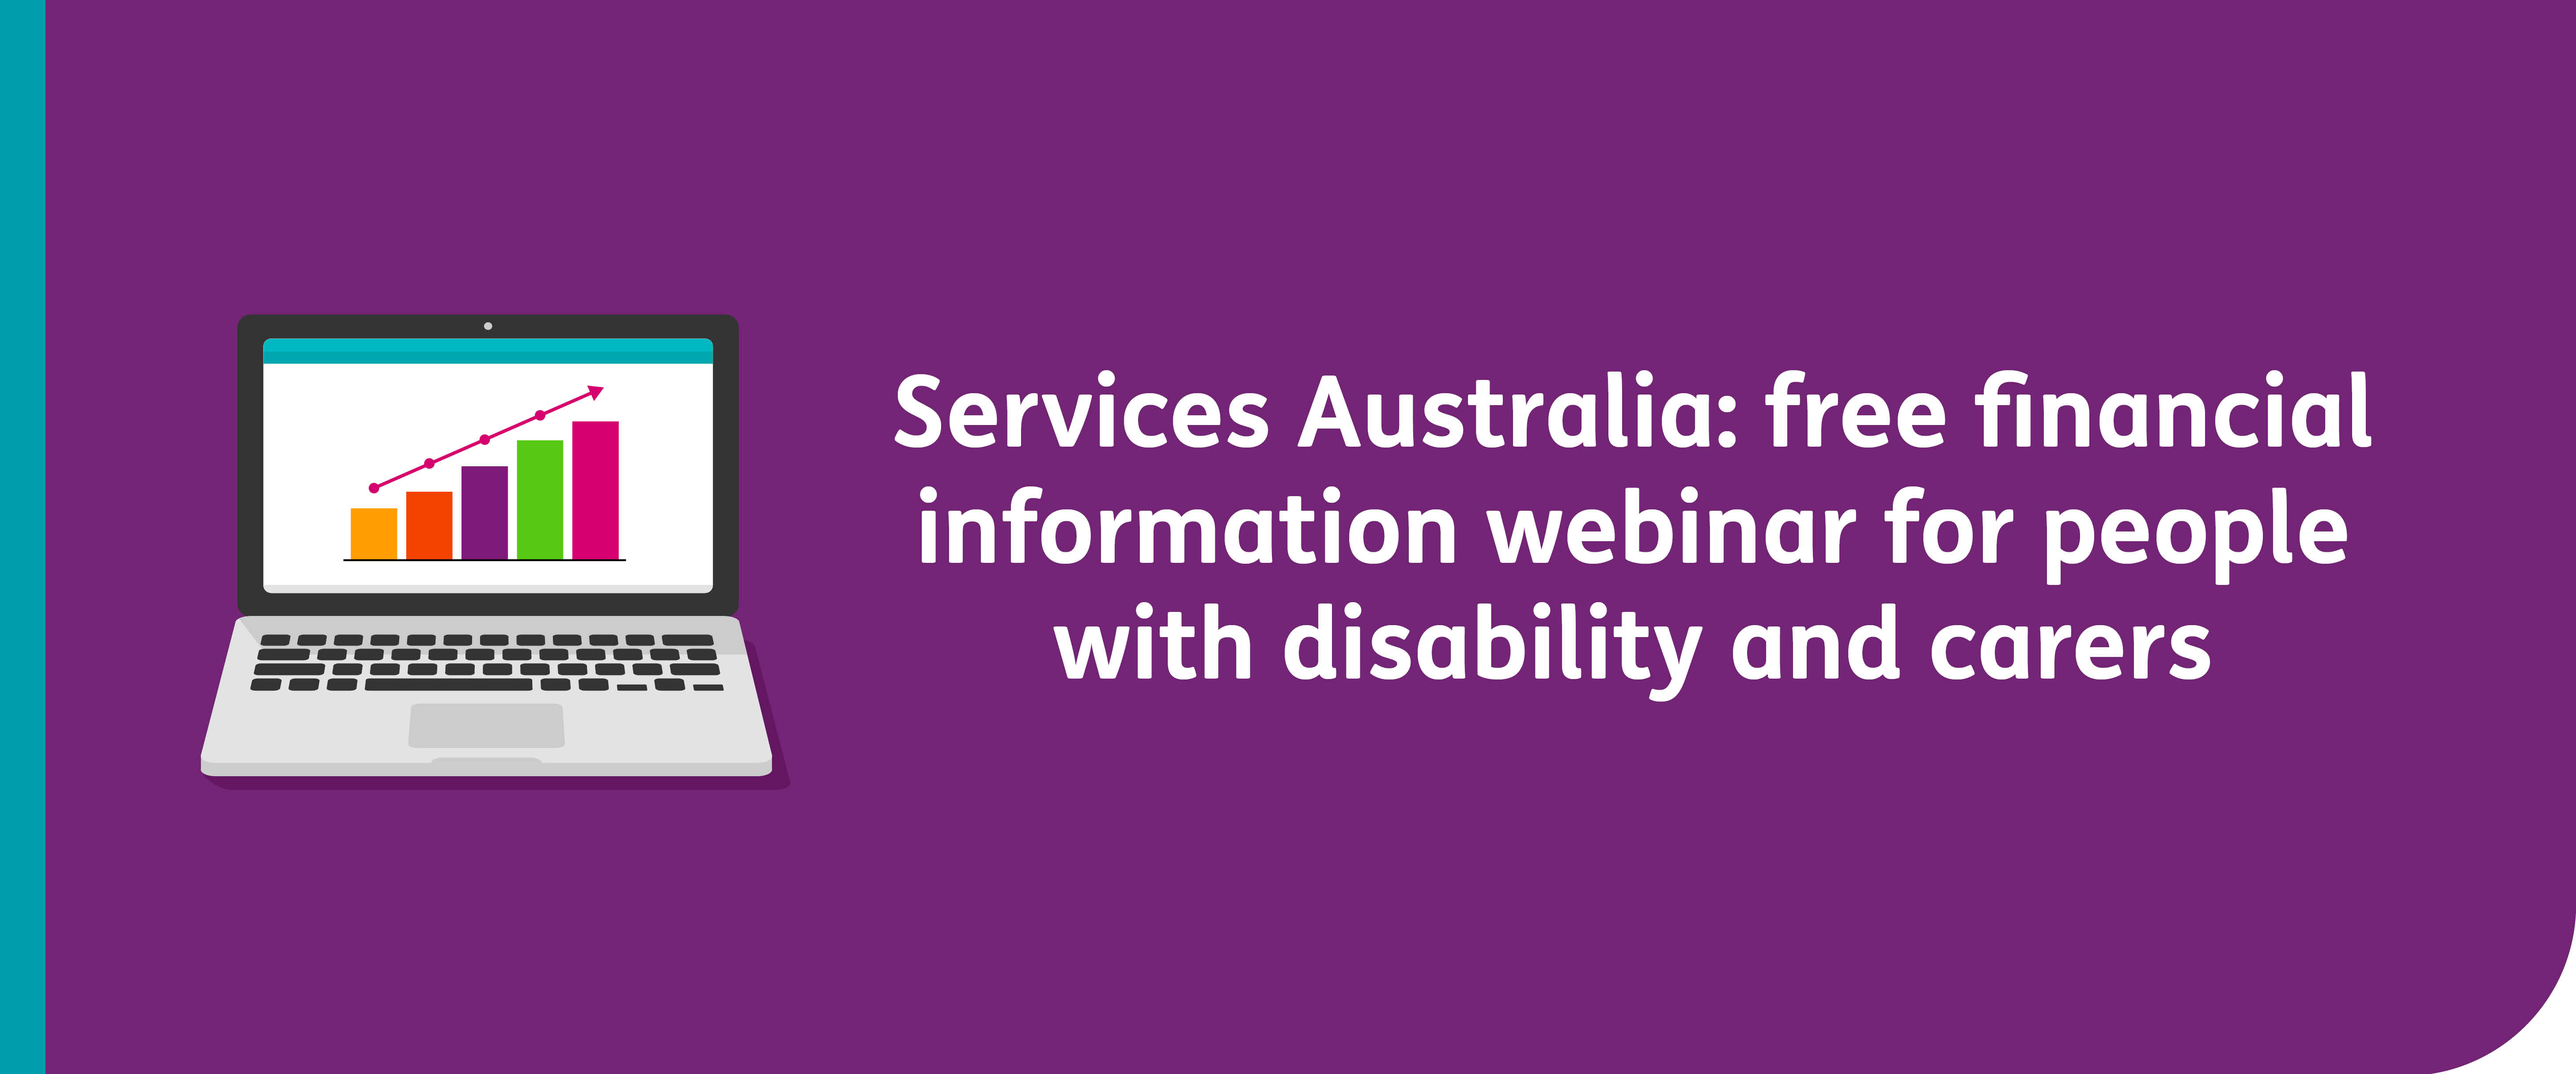 Services Australia: free financial information webinar for people with disability and carers with a cartoon of laptop with graphs on the screen